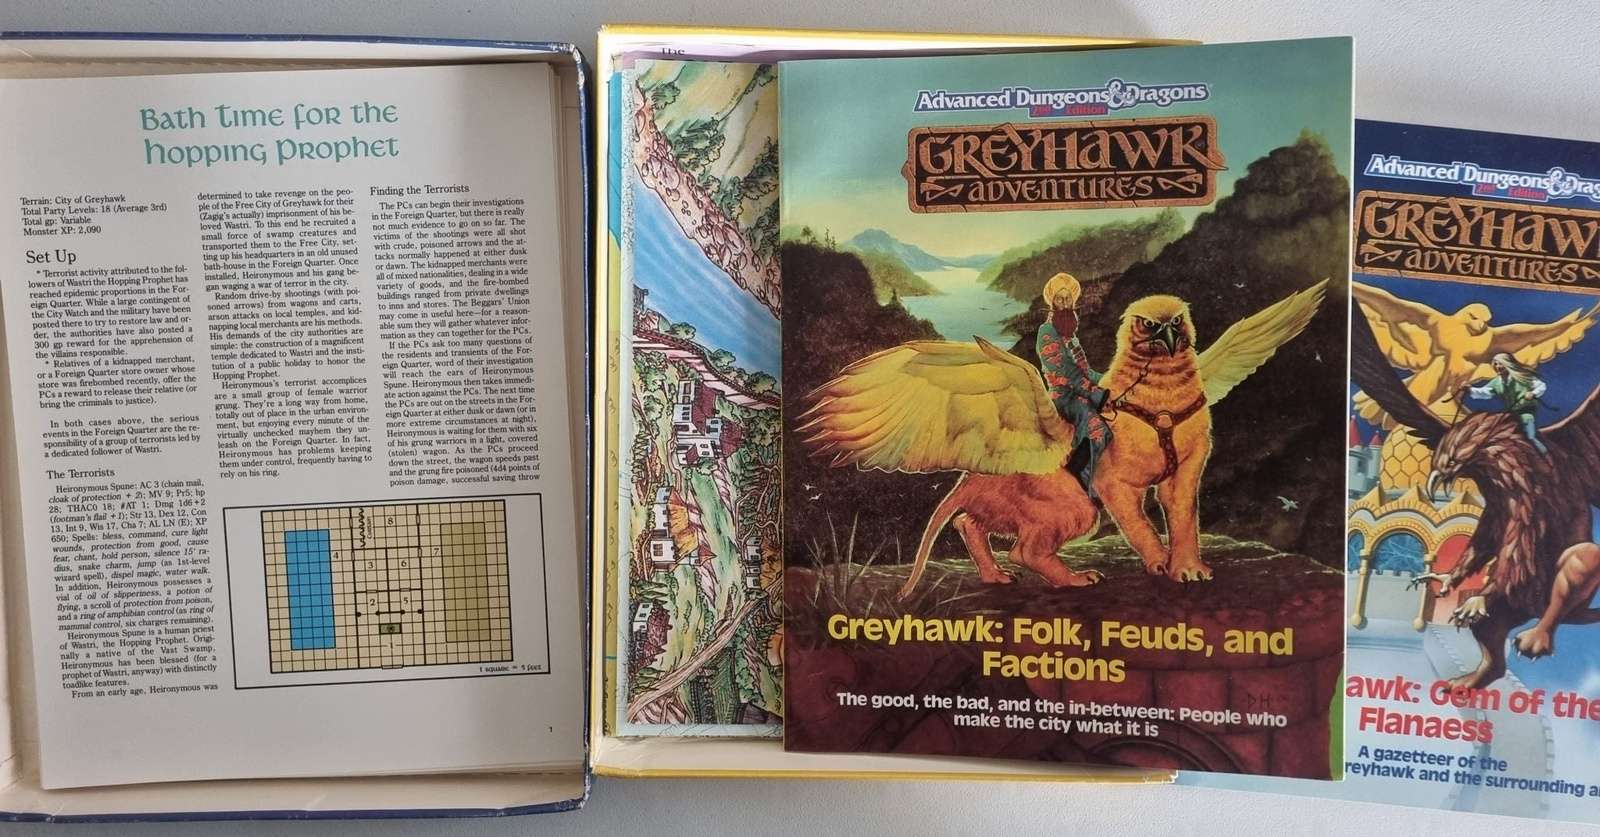 Advanced Dungeons and Dragons: Greyhawk Adventures -The City of Greyhawk (2e) Default Title